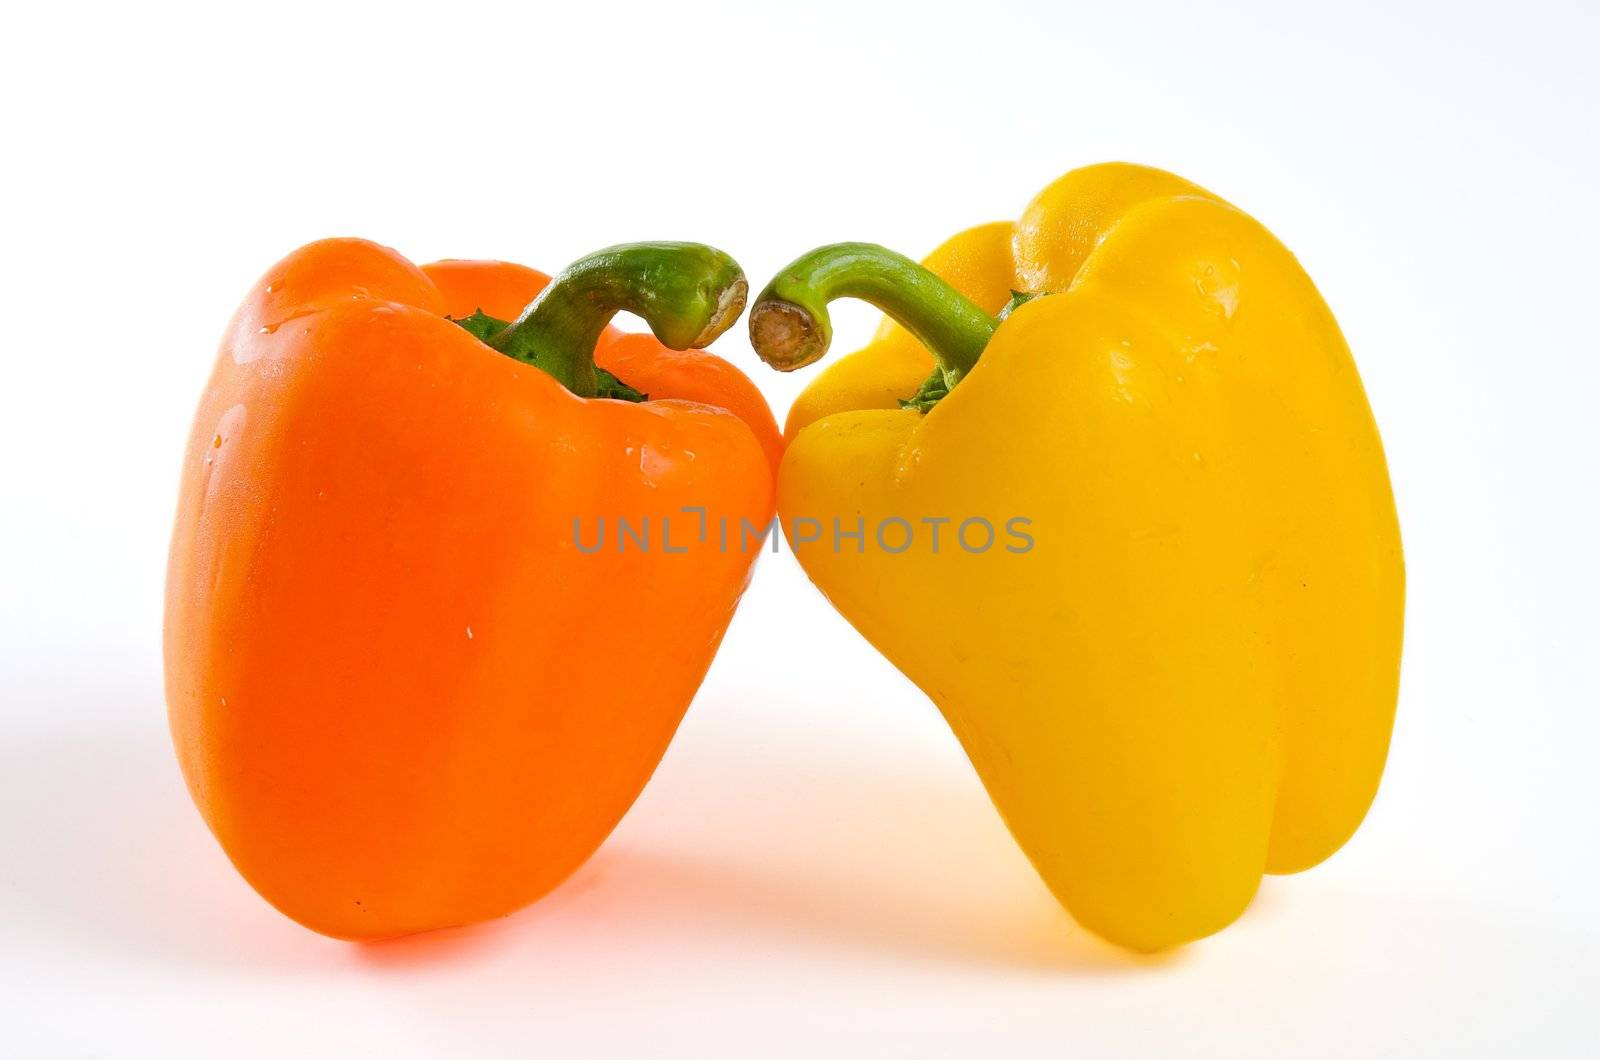 Two bell peppers leaning close together